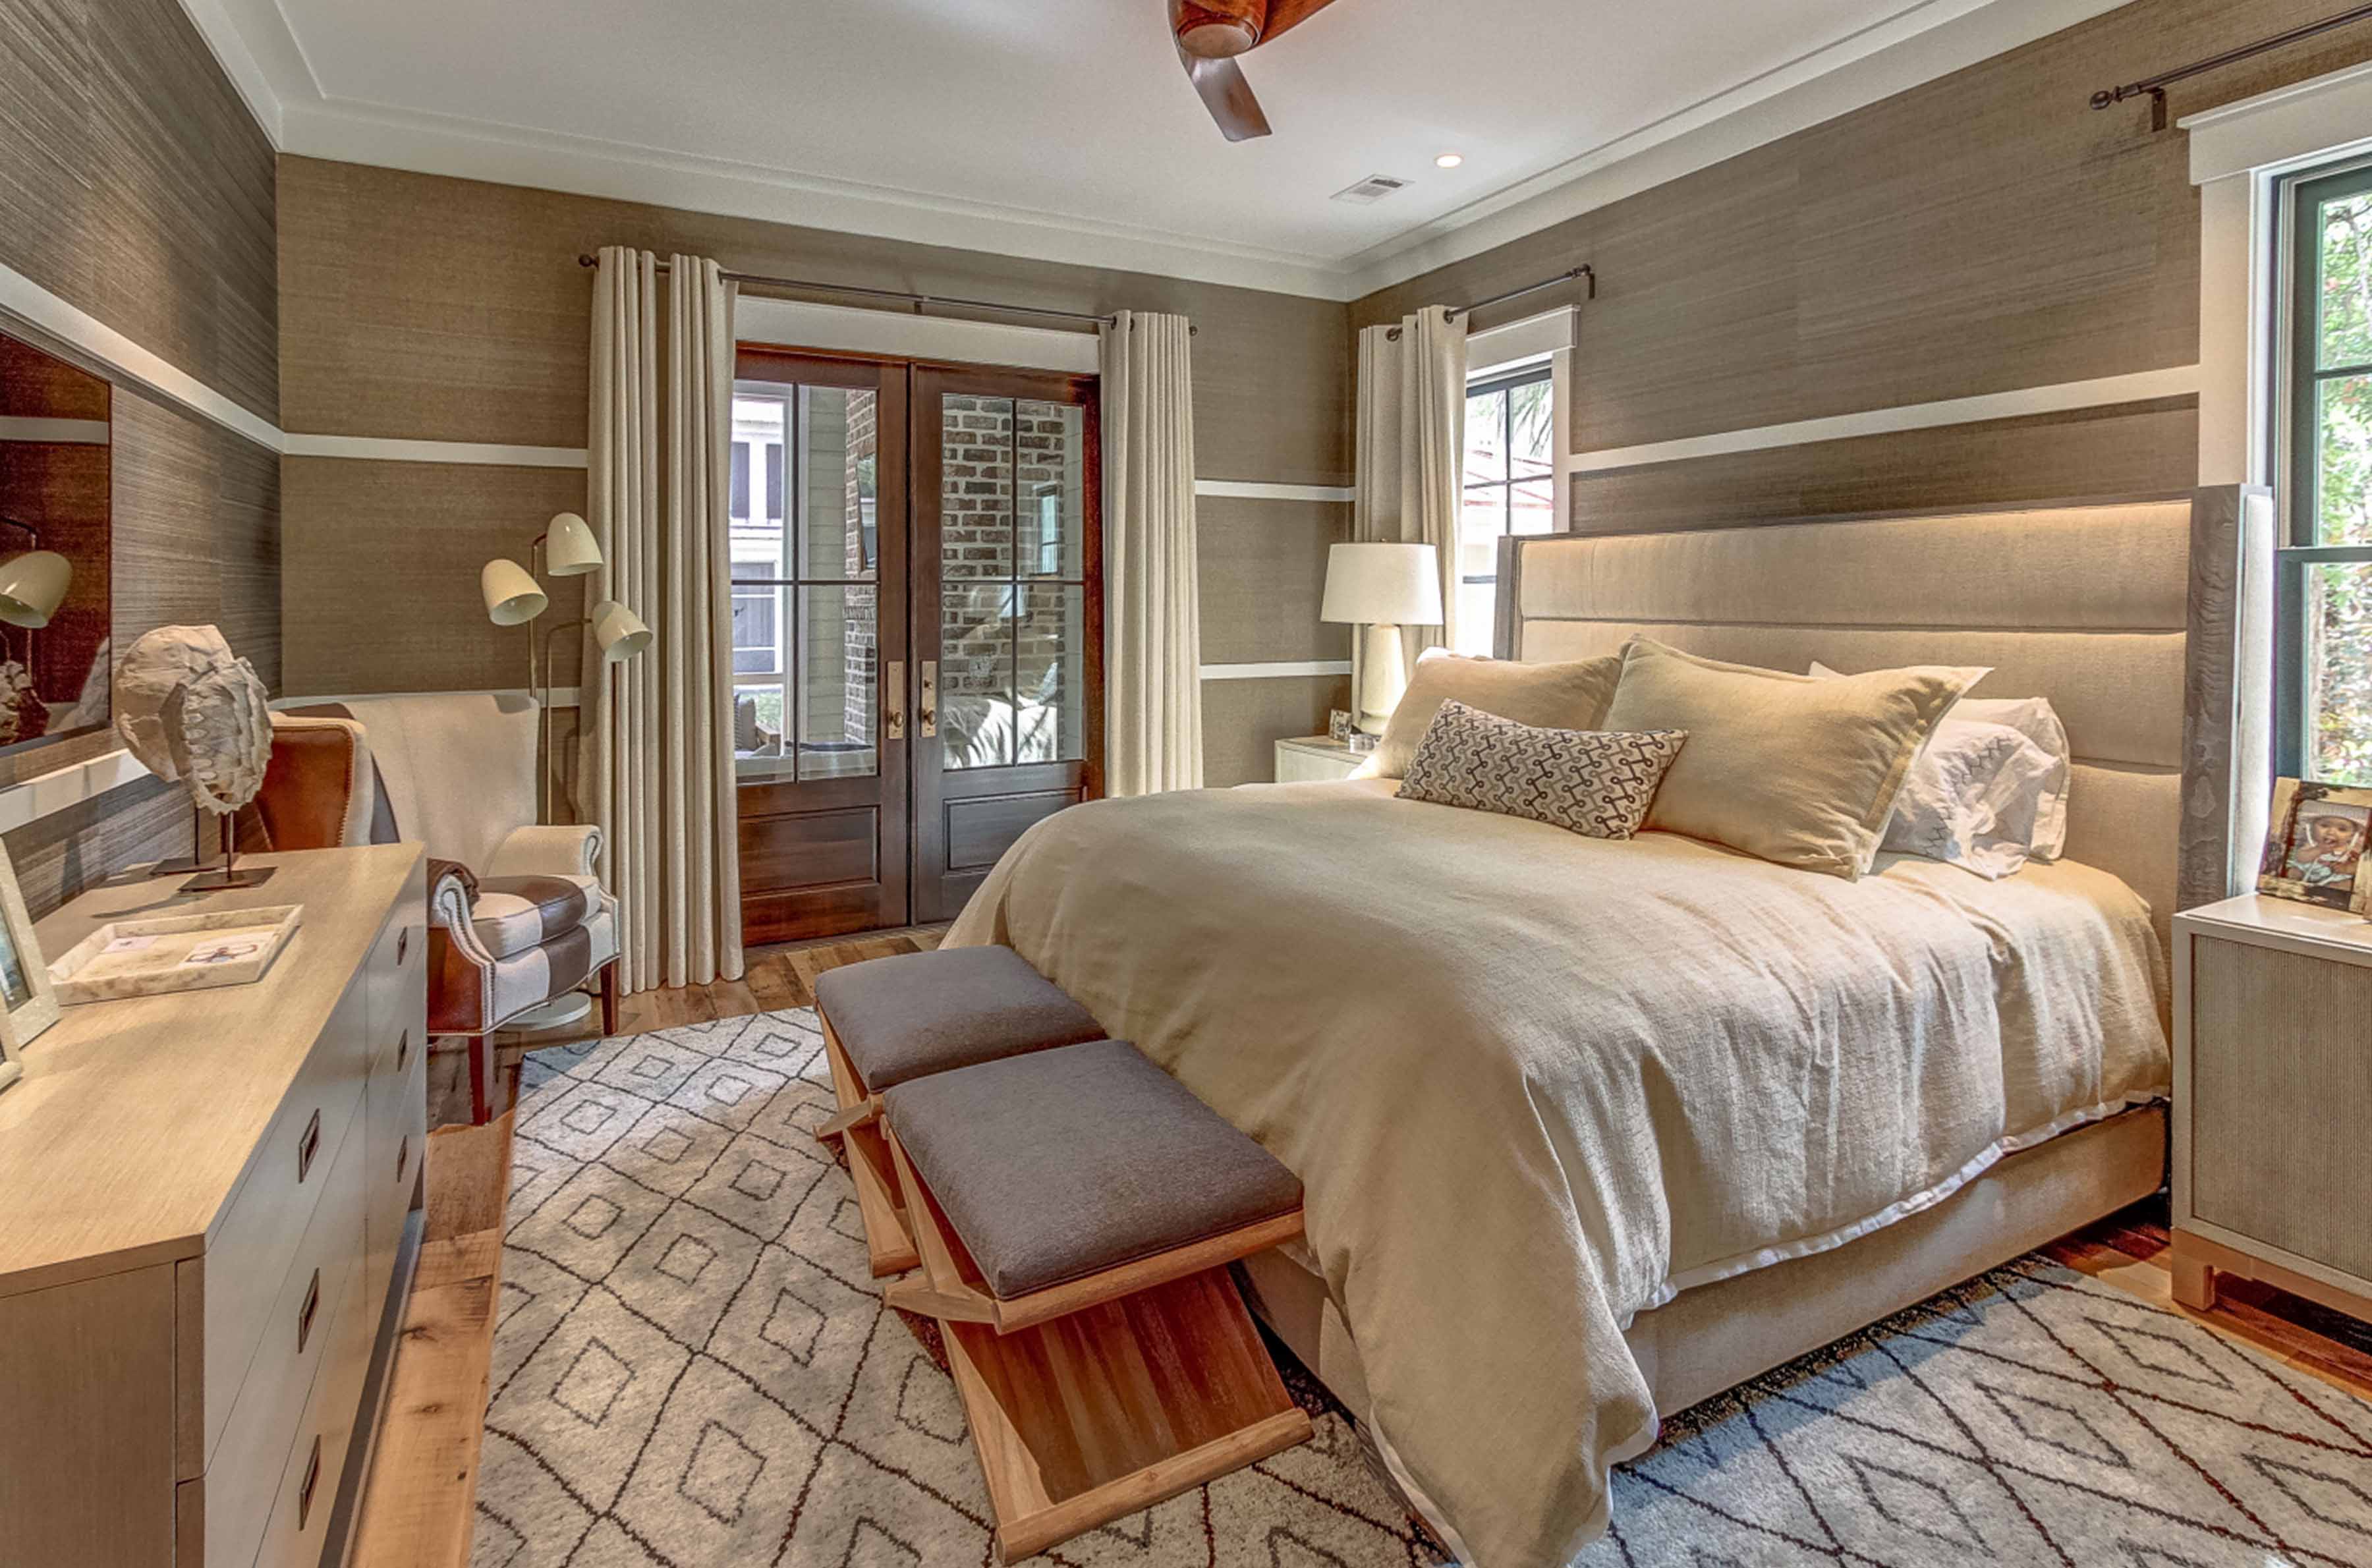 palmetto bluff interior design by Lisa Whitley of J Banks Design includes this bedroom designed to reflect the low-country charm of the region